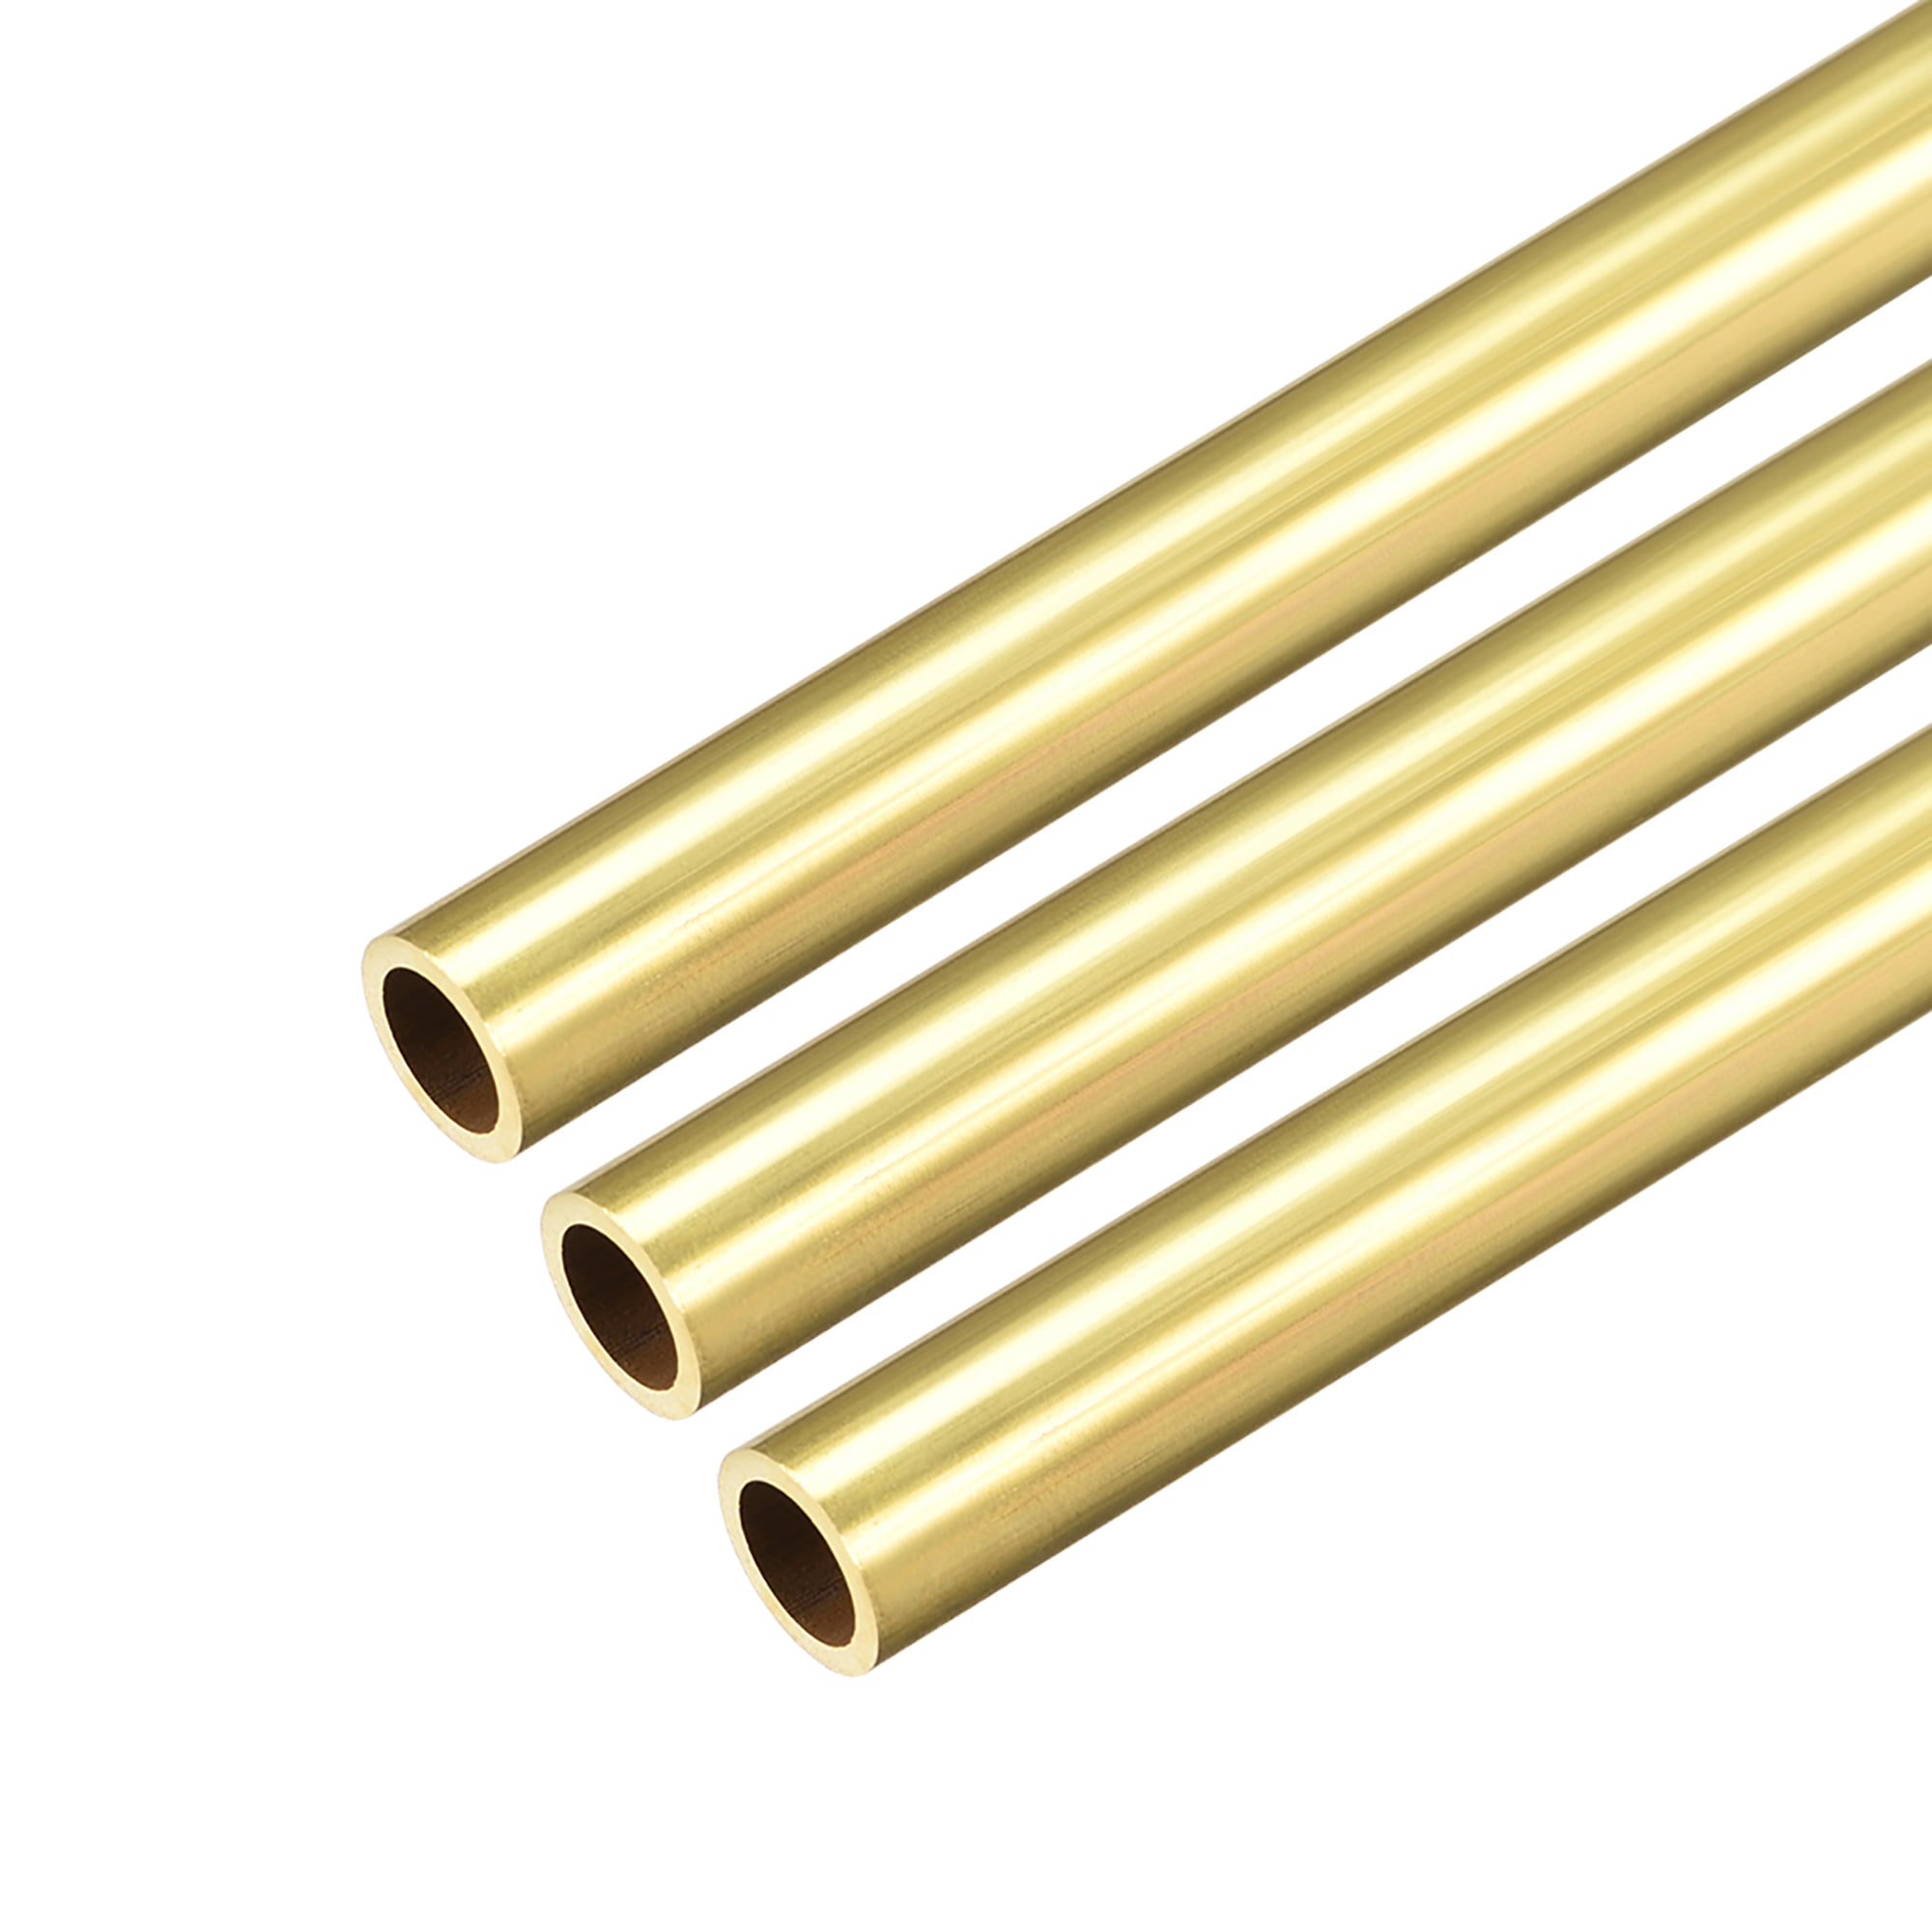 300mm Length 3mm OD 0.75mm Wall Thickness uxcell Brass Round Tube Seamless Straight Pipe Tubing 3 Pcs